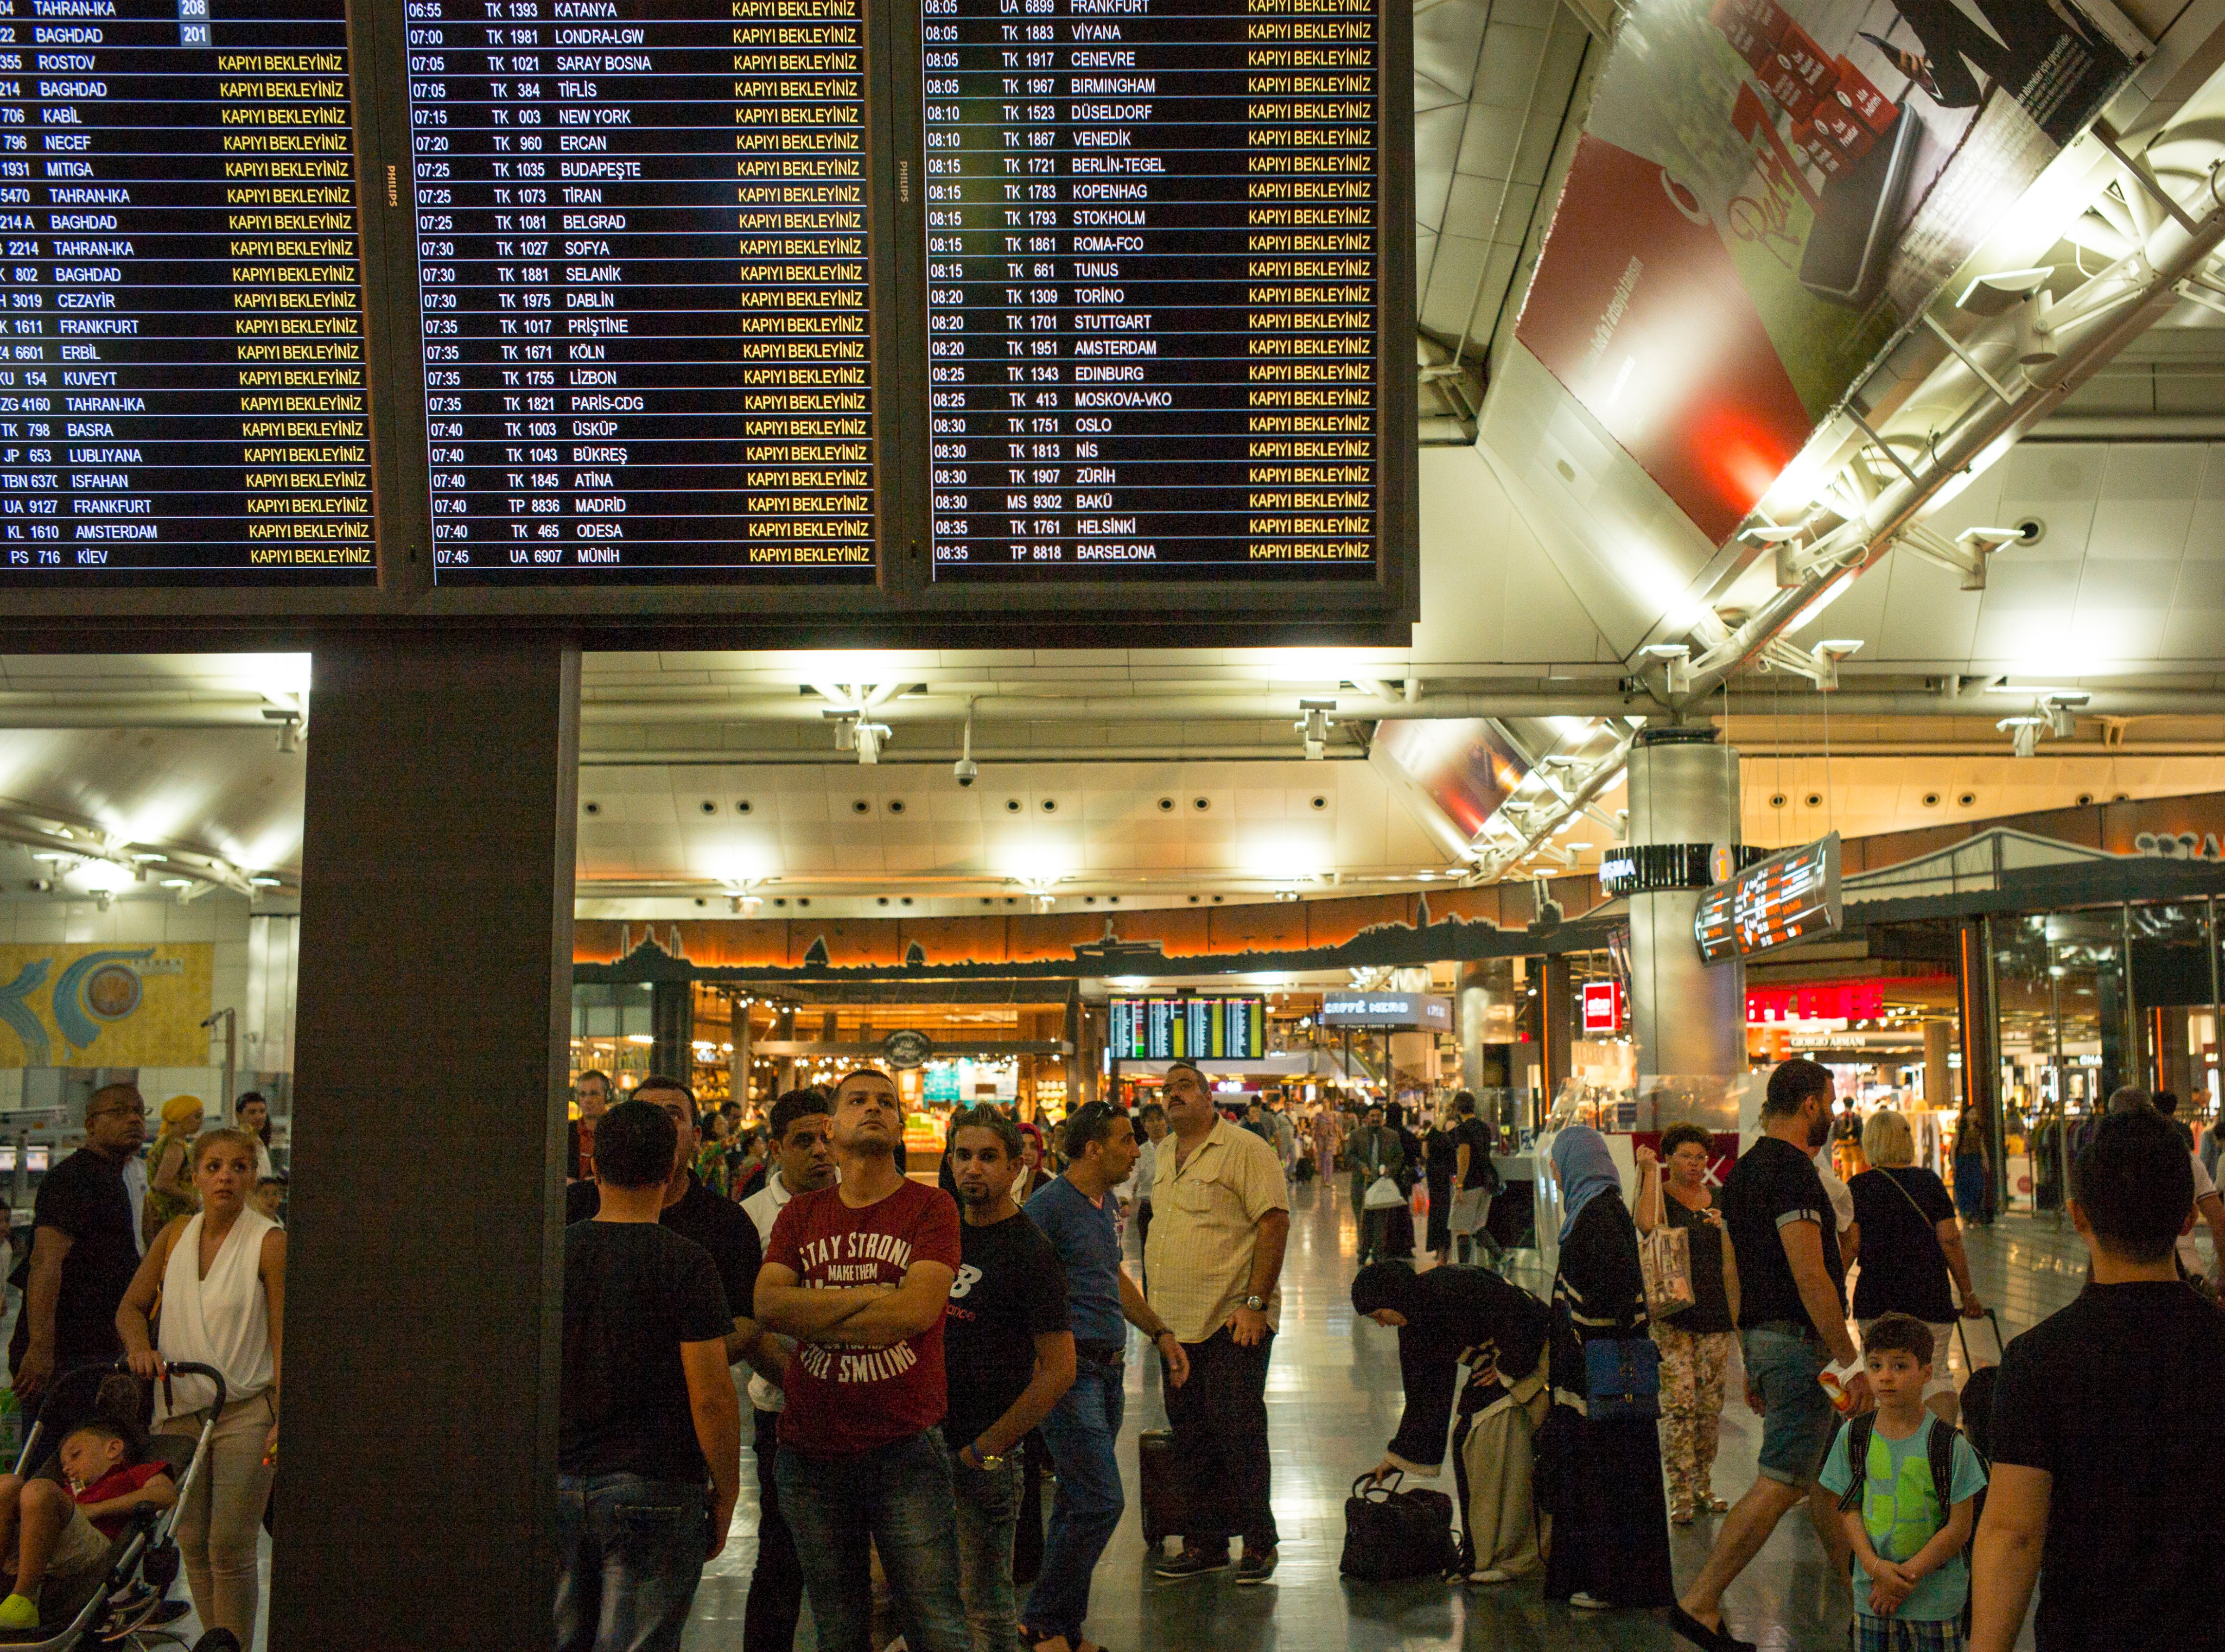 Travelers check an electronic flight board for their time of departure and gate August 29, 2015 at the Istanbul Ataturk Airport in Istanbul, Turkey. (Robert Nickelsberg&mdash;Getty Images)